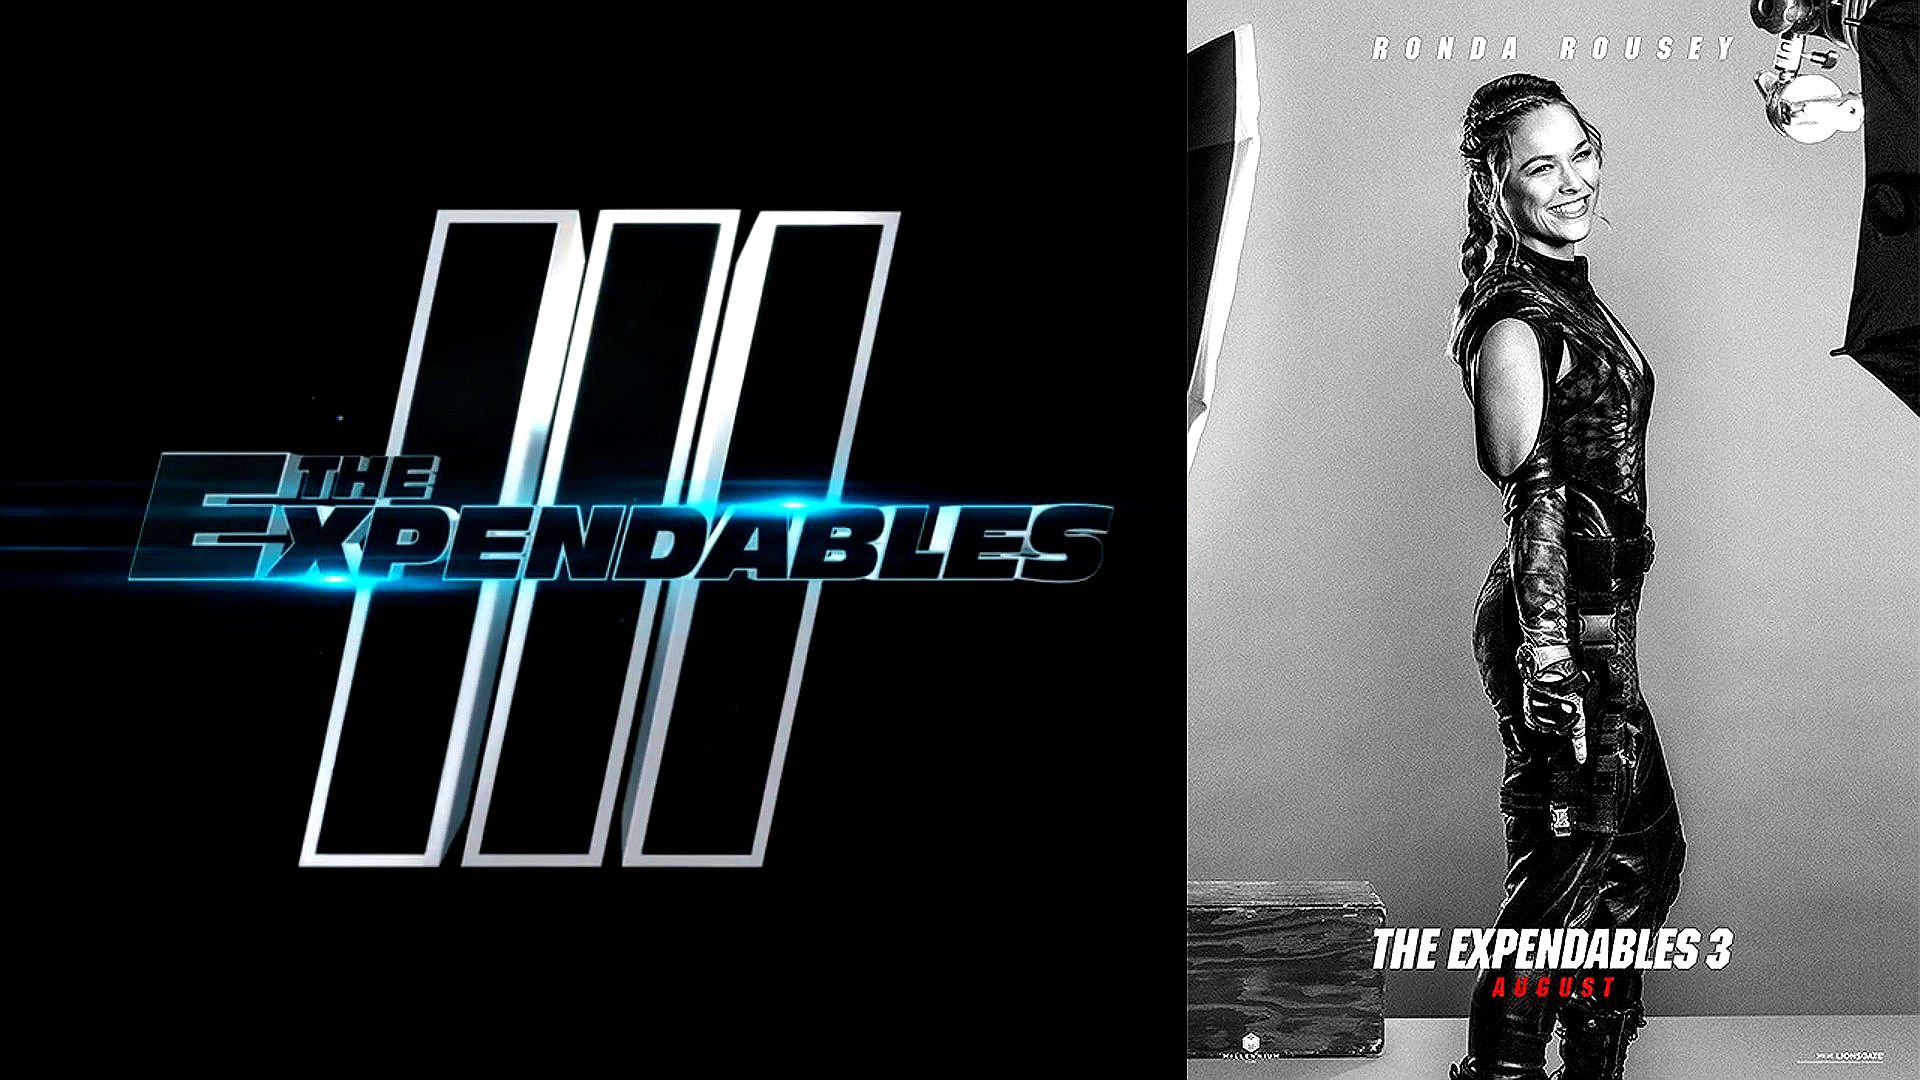 movie, the expendables 3, luna (the expendables), ronda rousey, the expendables